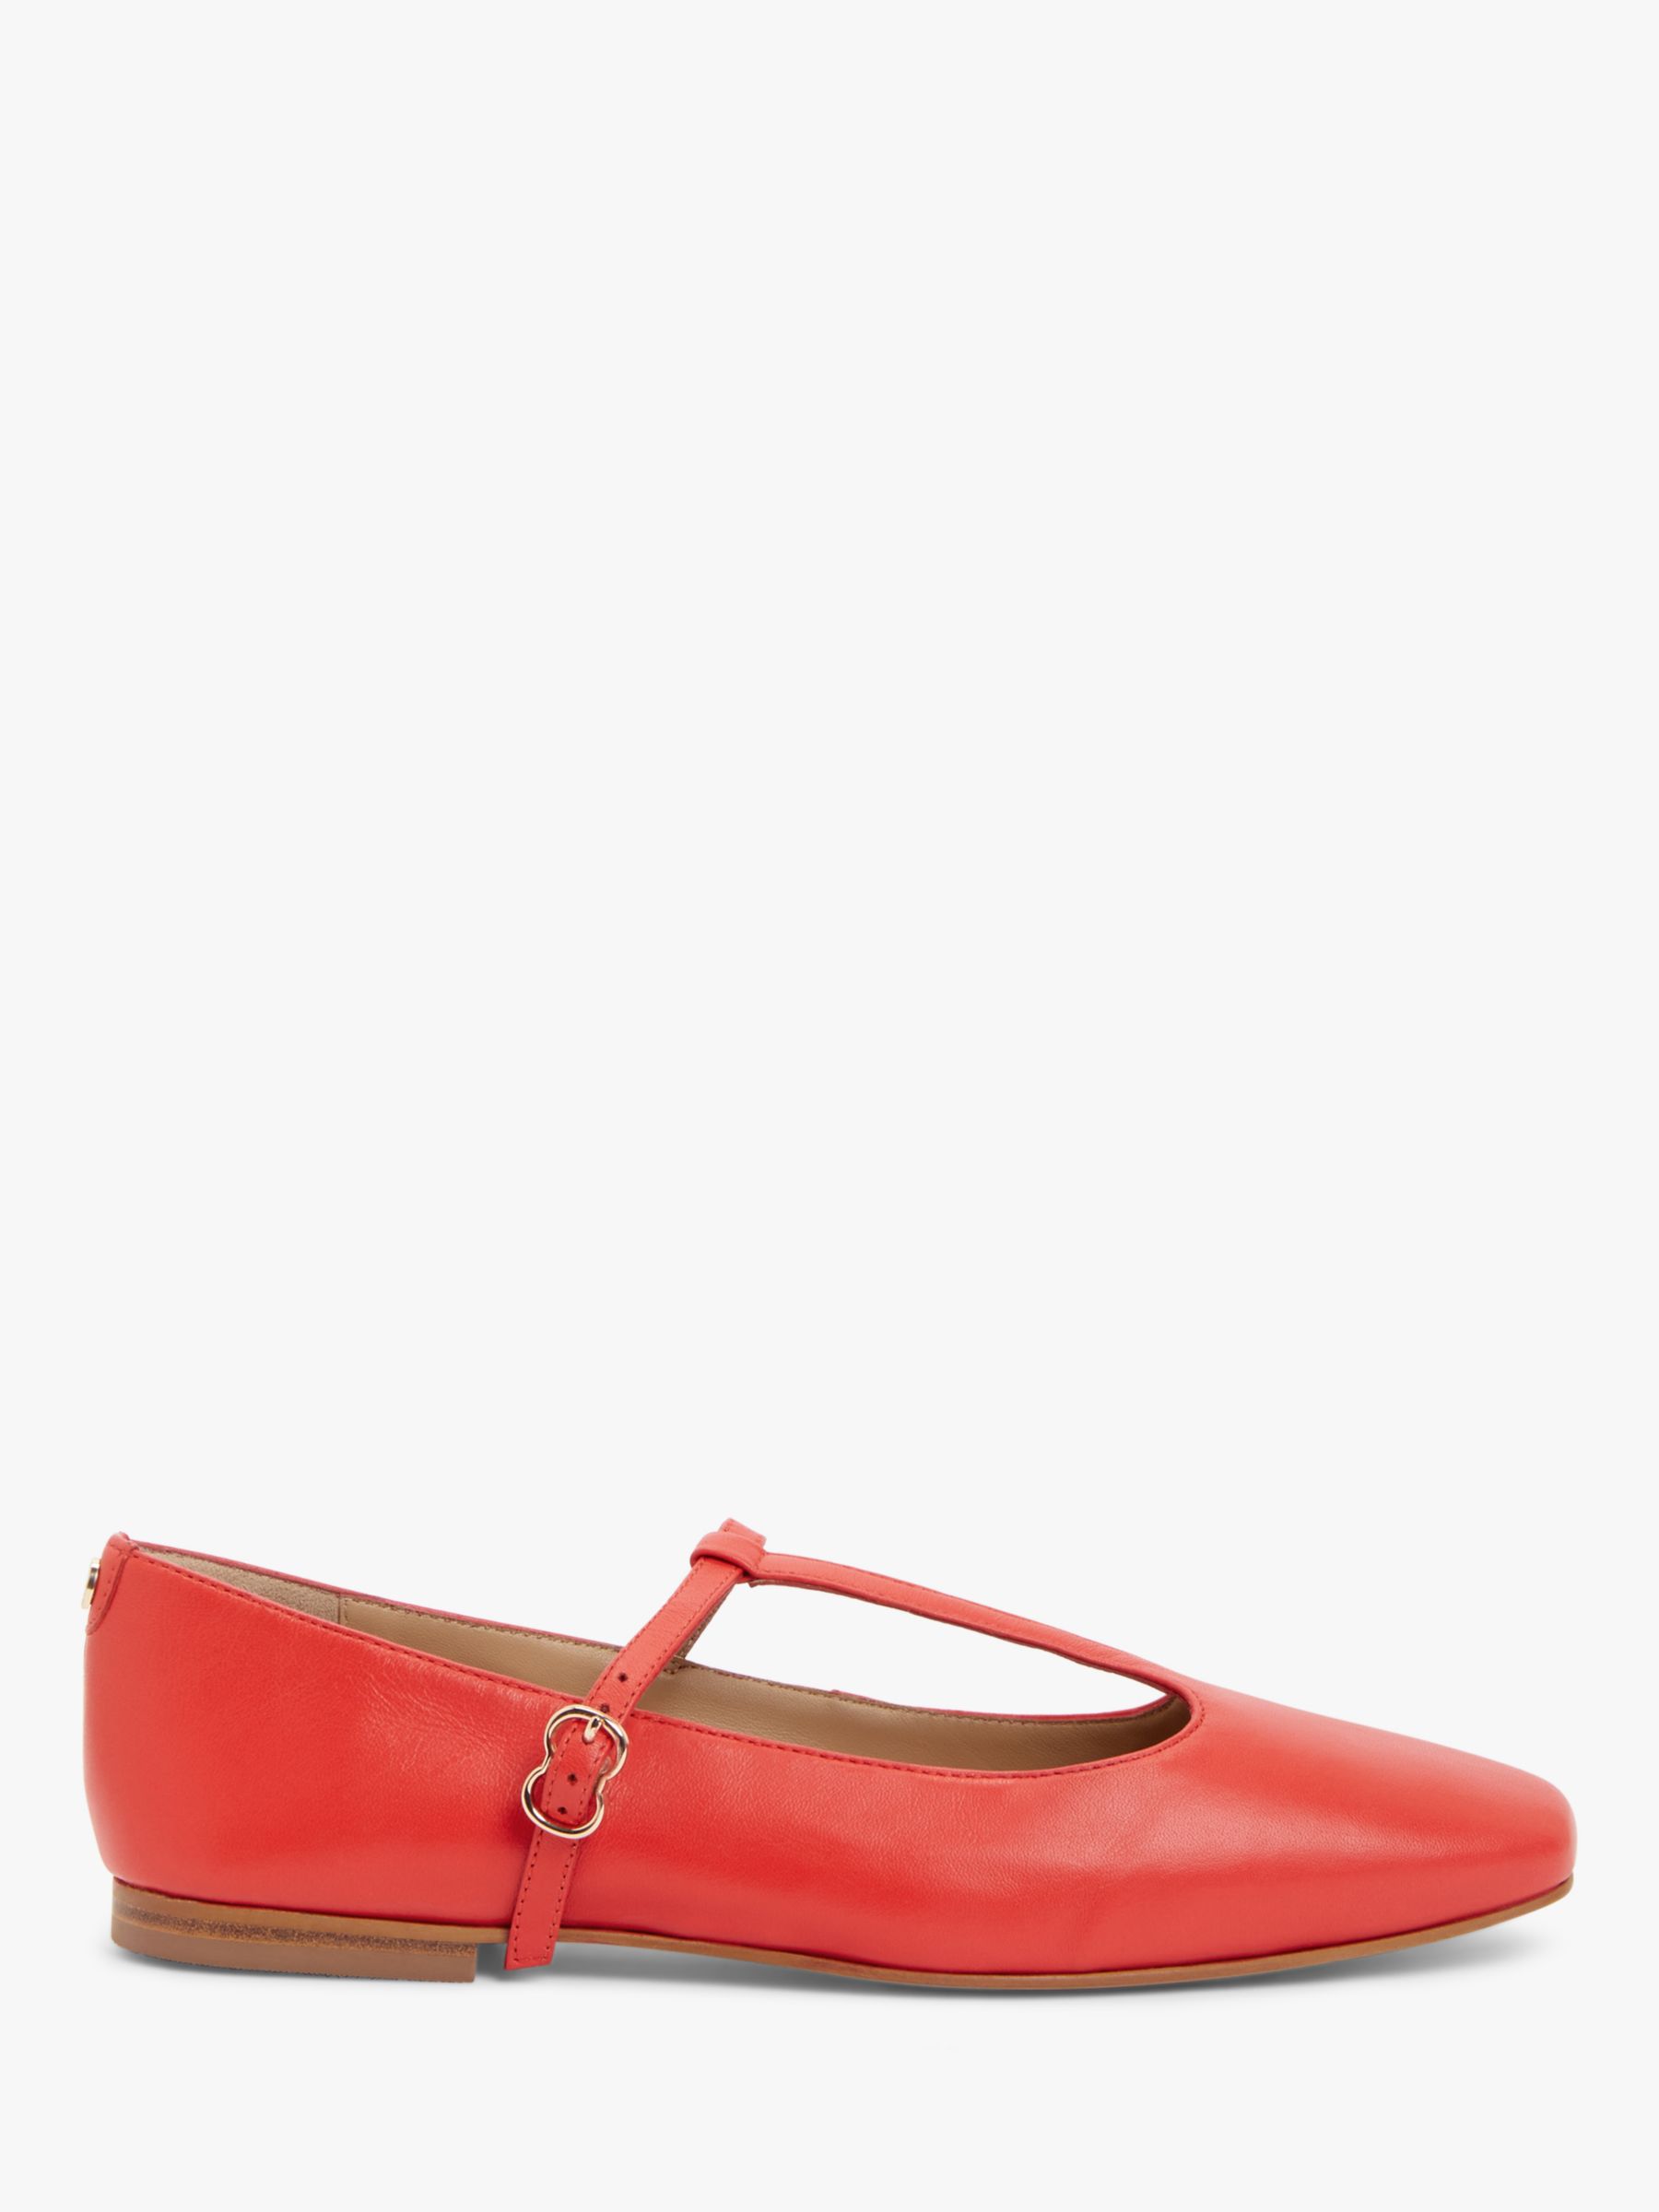 Women's Red Shoes | John Lewis & Partners